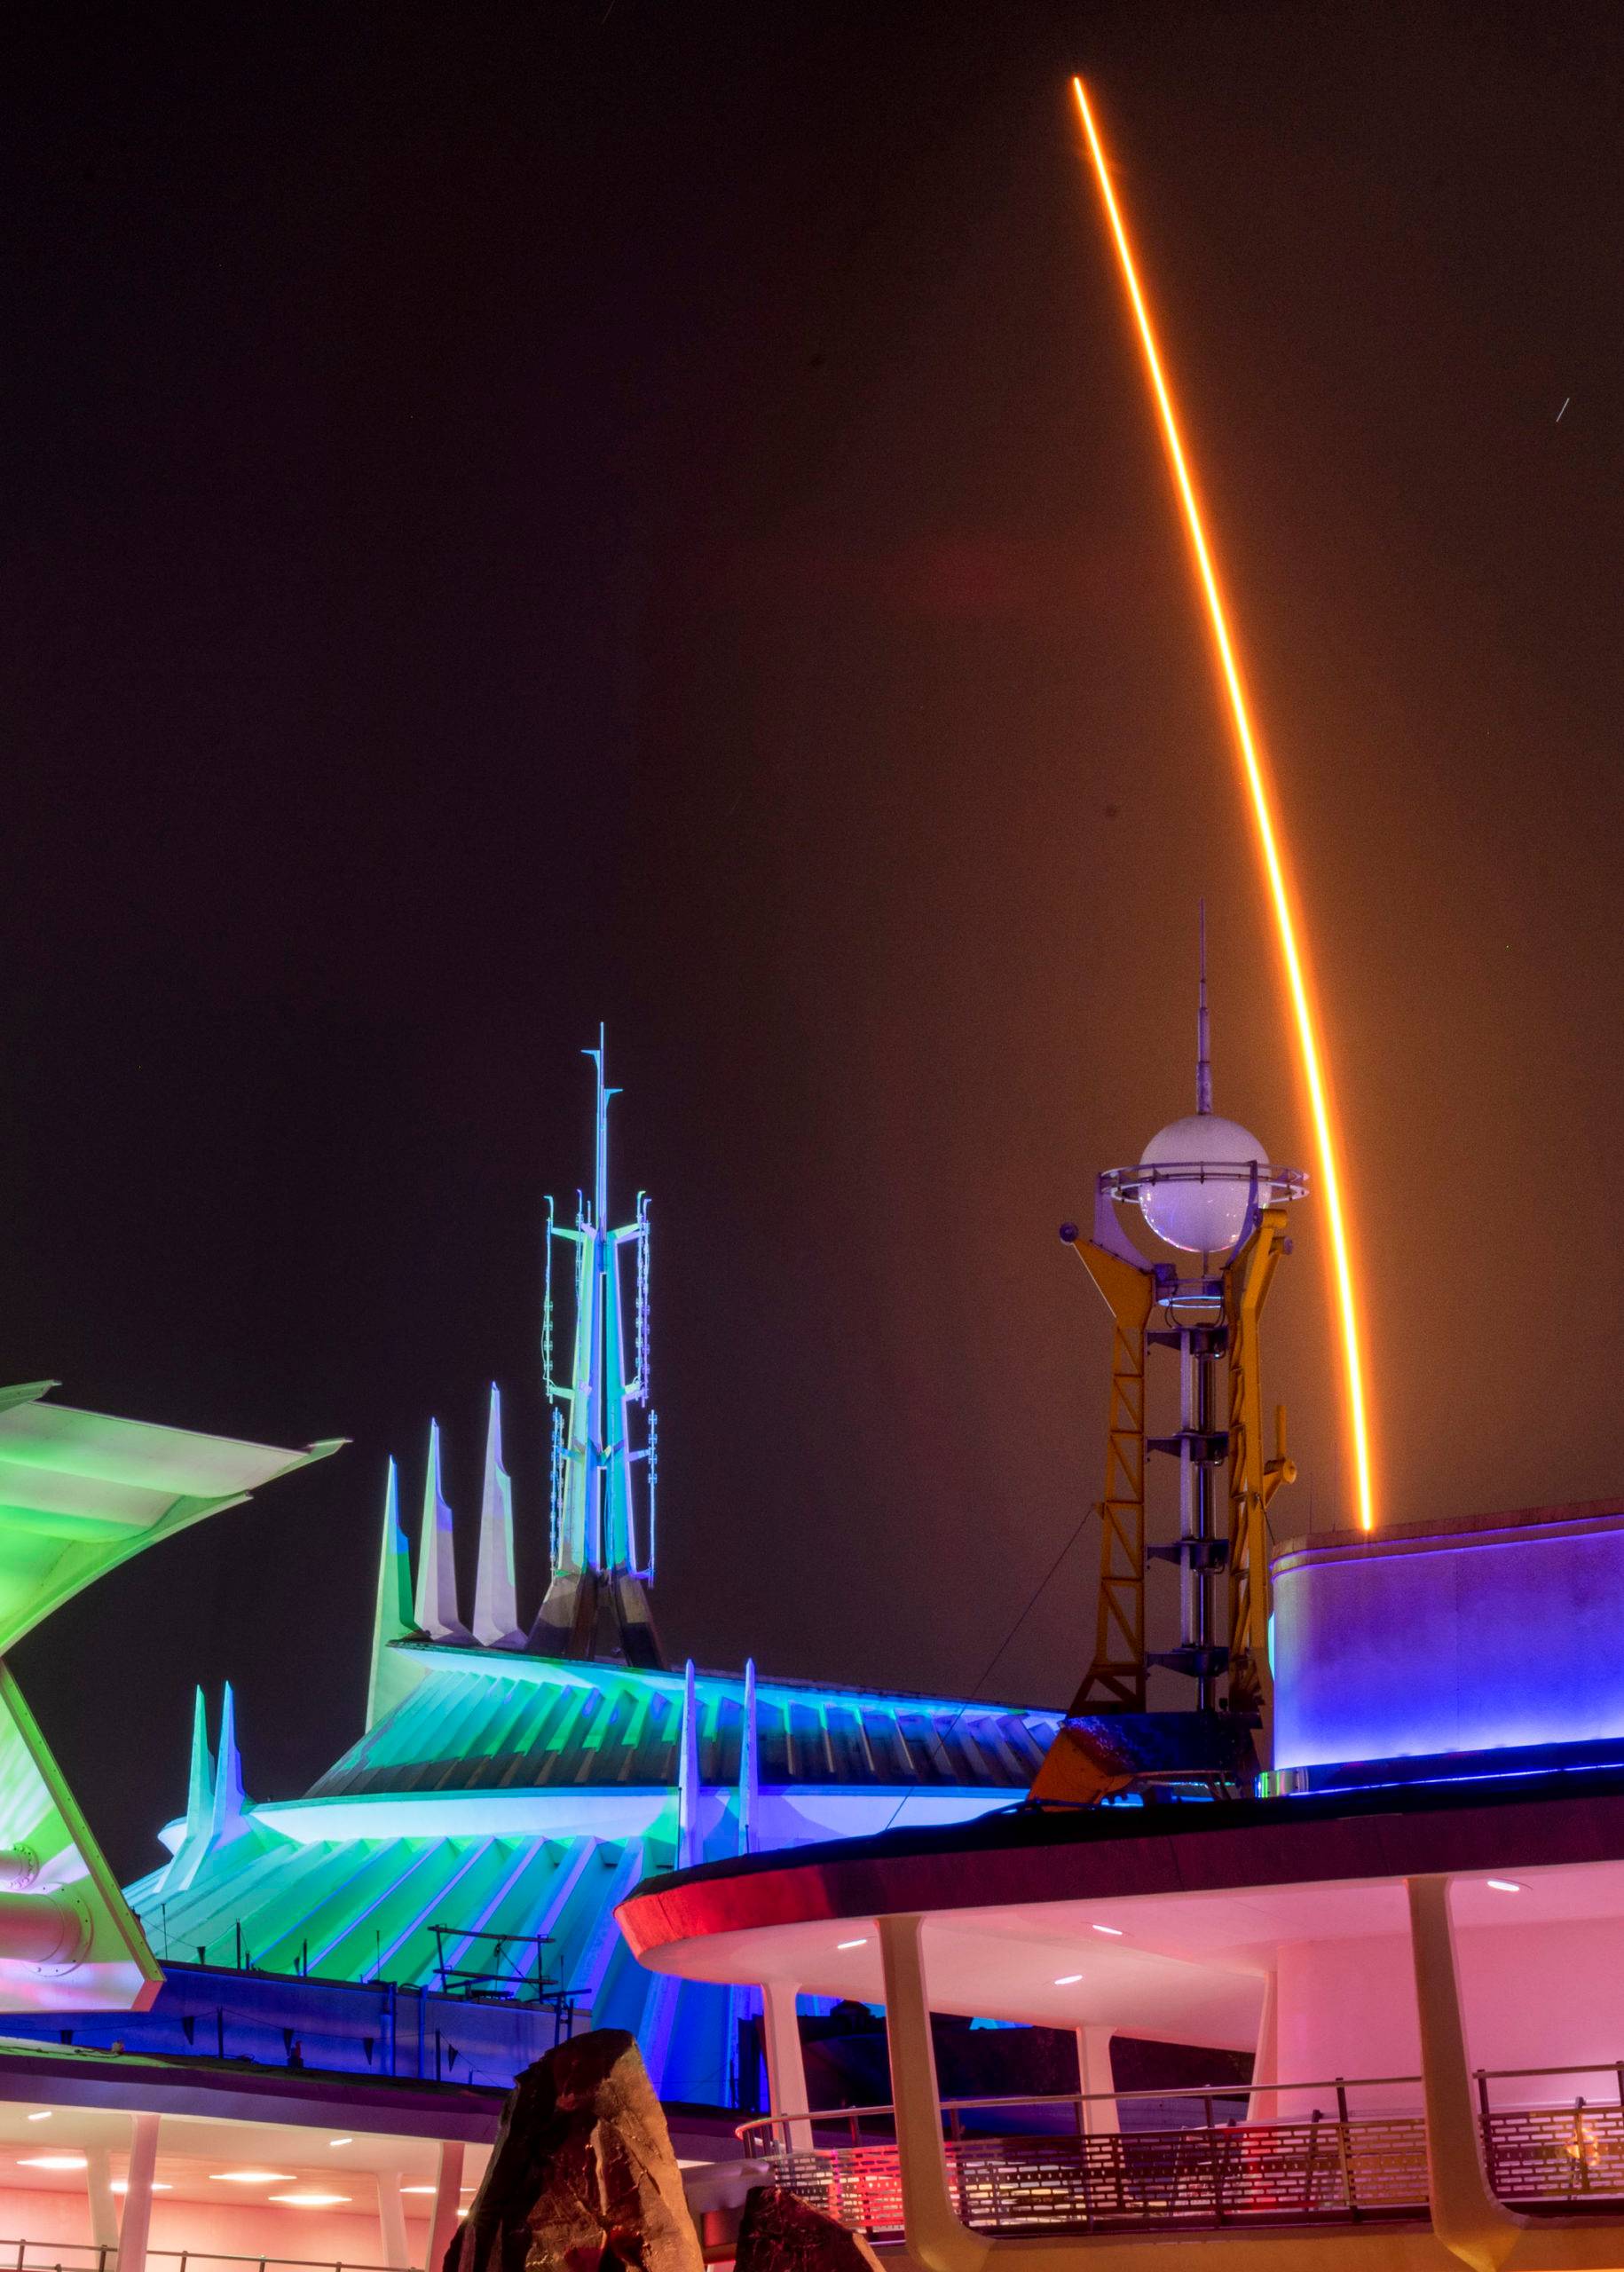 SpaceX’s Falcon 9 rocketlLaunch over Star Wars Galaxy's Edge and Space Mountain